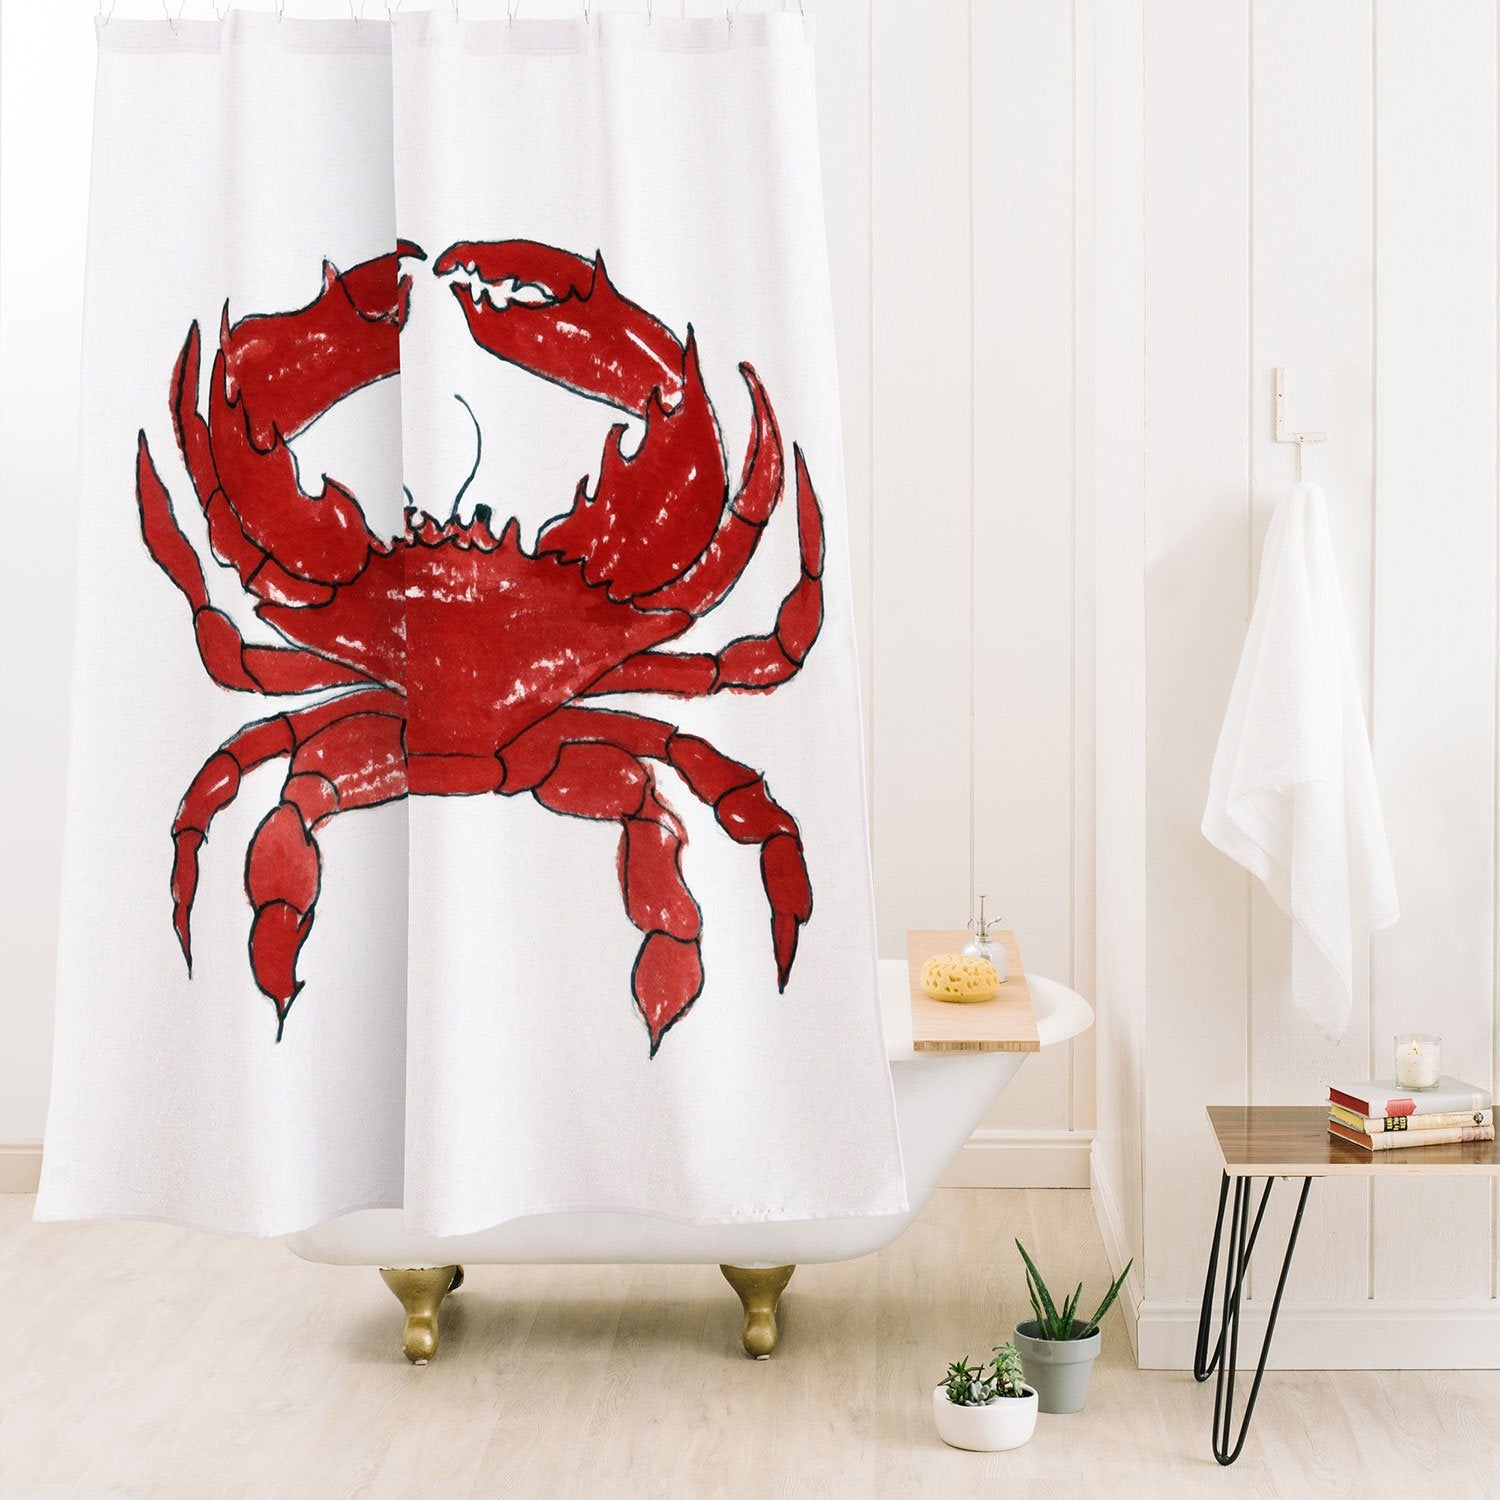 Red Crab Shower Curtain